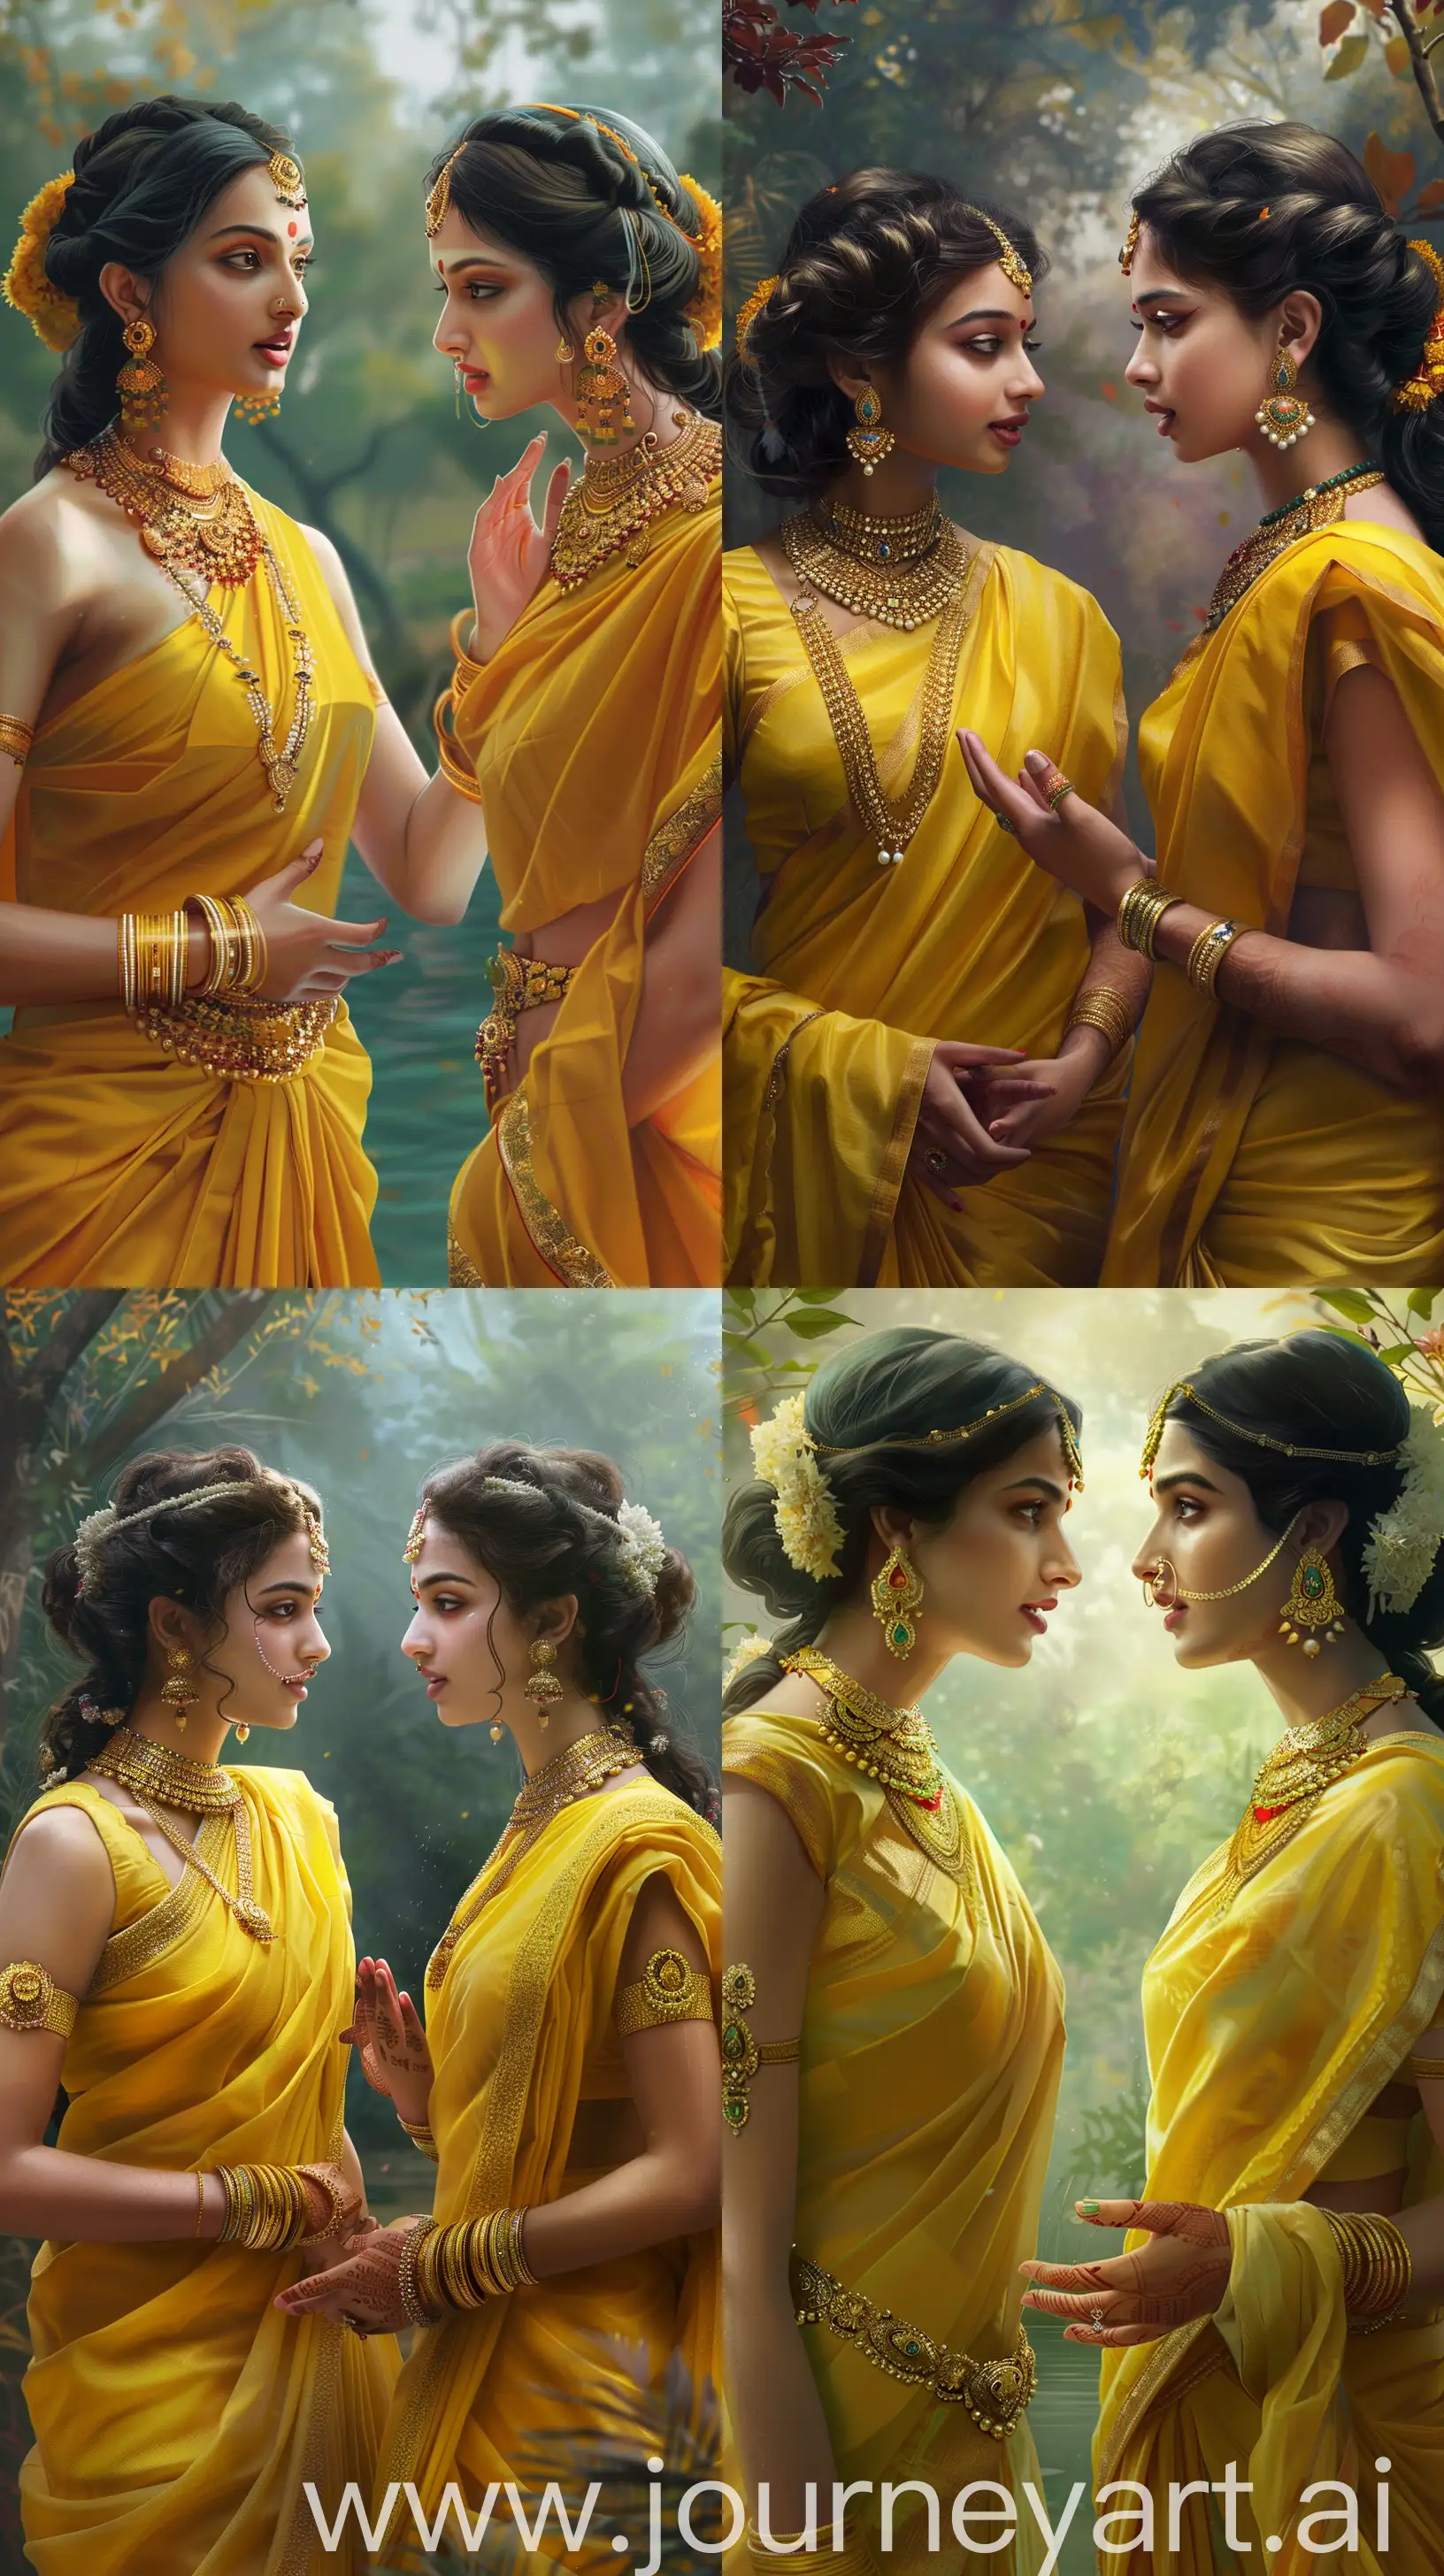 Ancient-Indian-Women-in-Yellow-Sarees-Engaged-in-Serene-Conversation